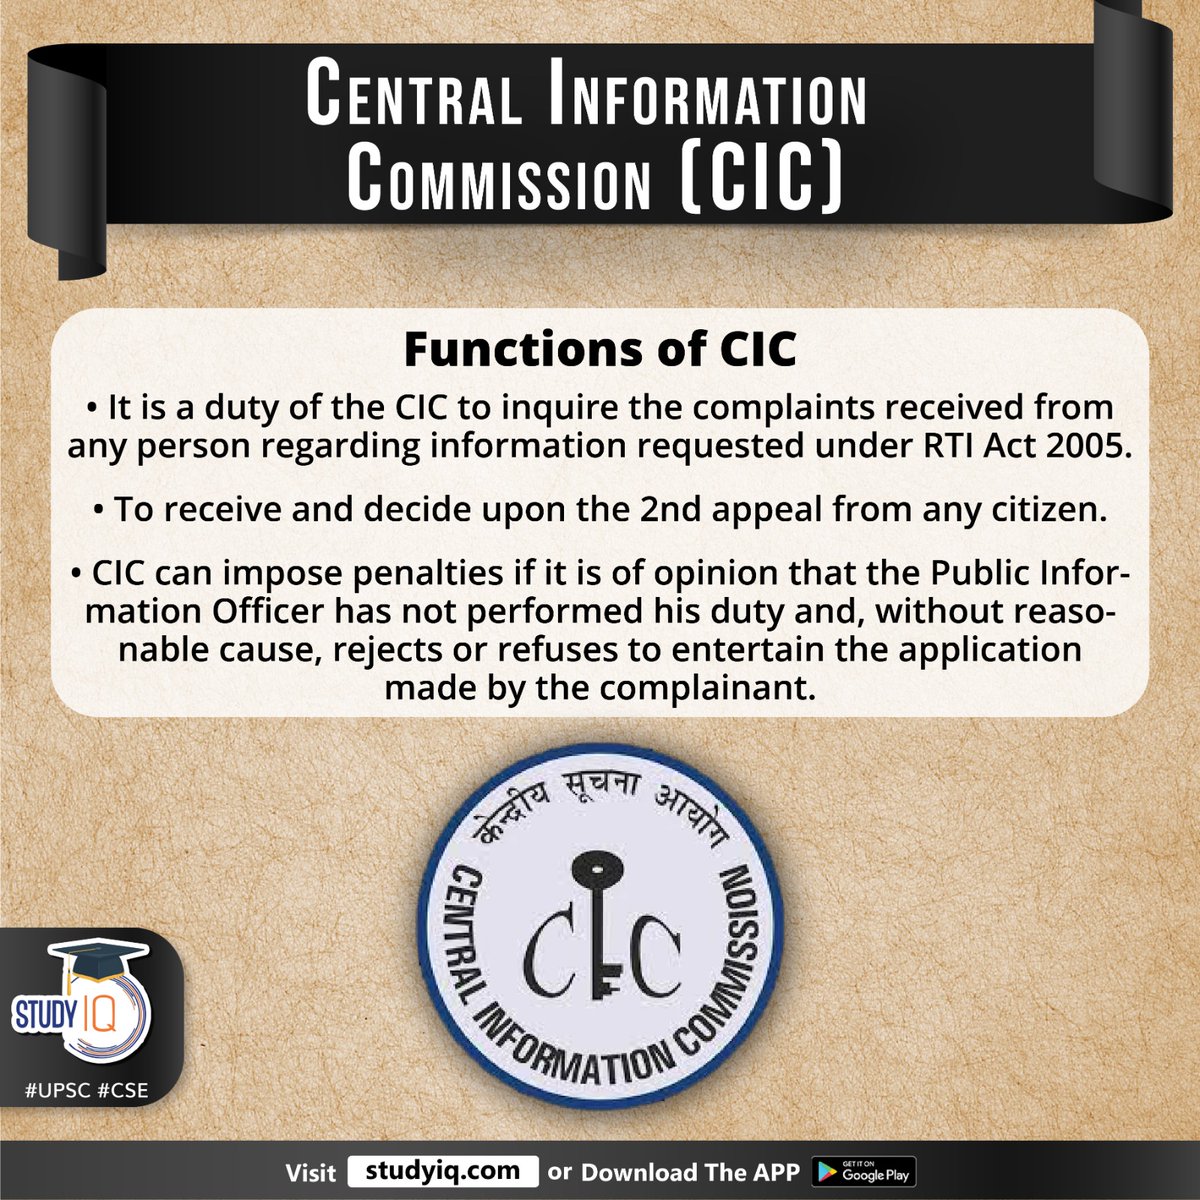 Central Information Commission (CIC)

#centralinformationcommission #cic #whyinnews #uniongovt #chiefinformationcommissioner #righttoinformationact #jurisdiction #centralpublicauthorities #informationcommissioners #rtiact #publicinformationofficer #publicauthority #upsc